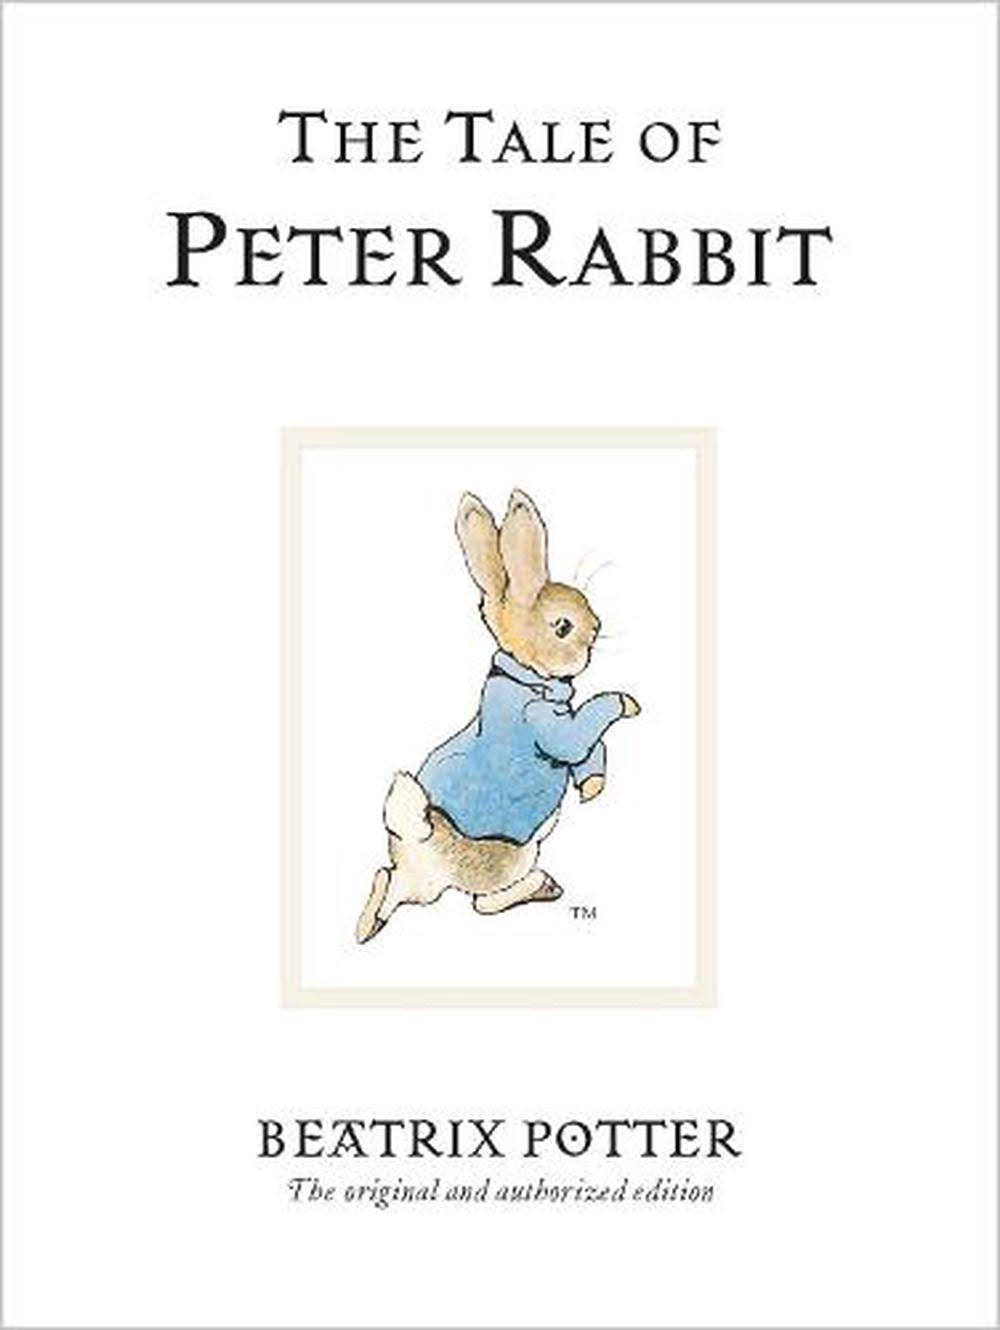 The Tale of Peter Rabbit [Book]